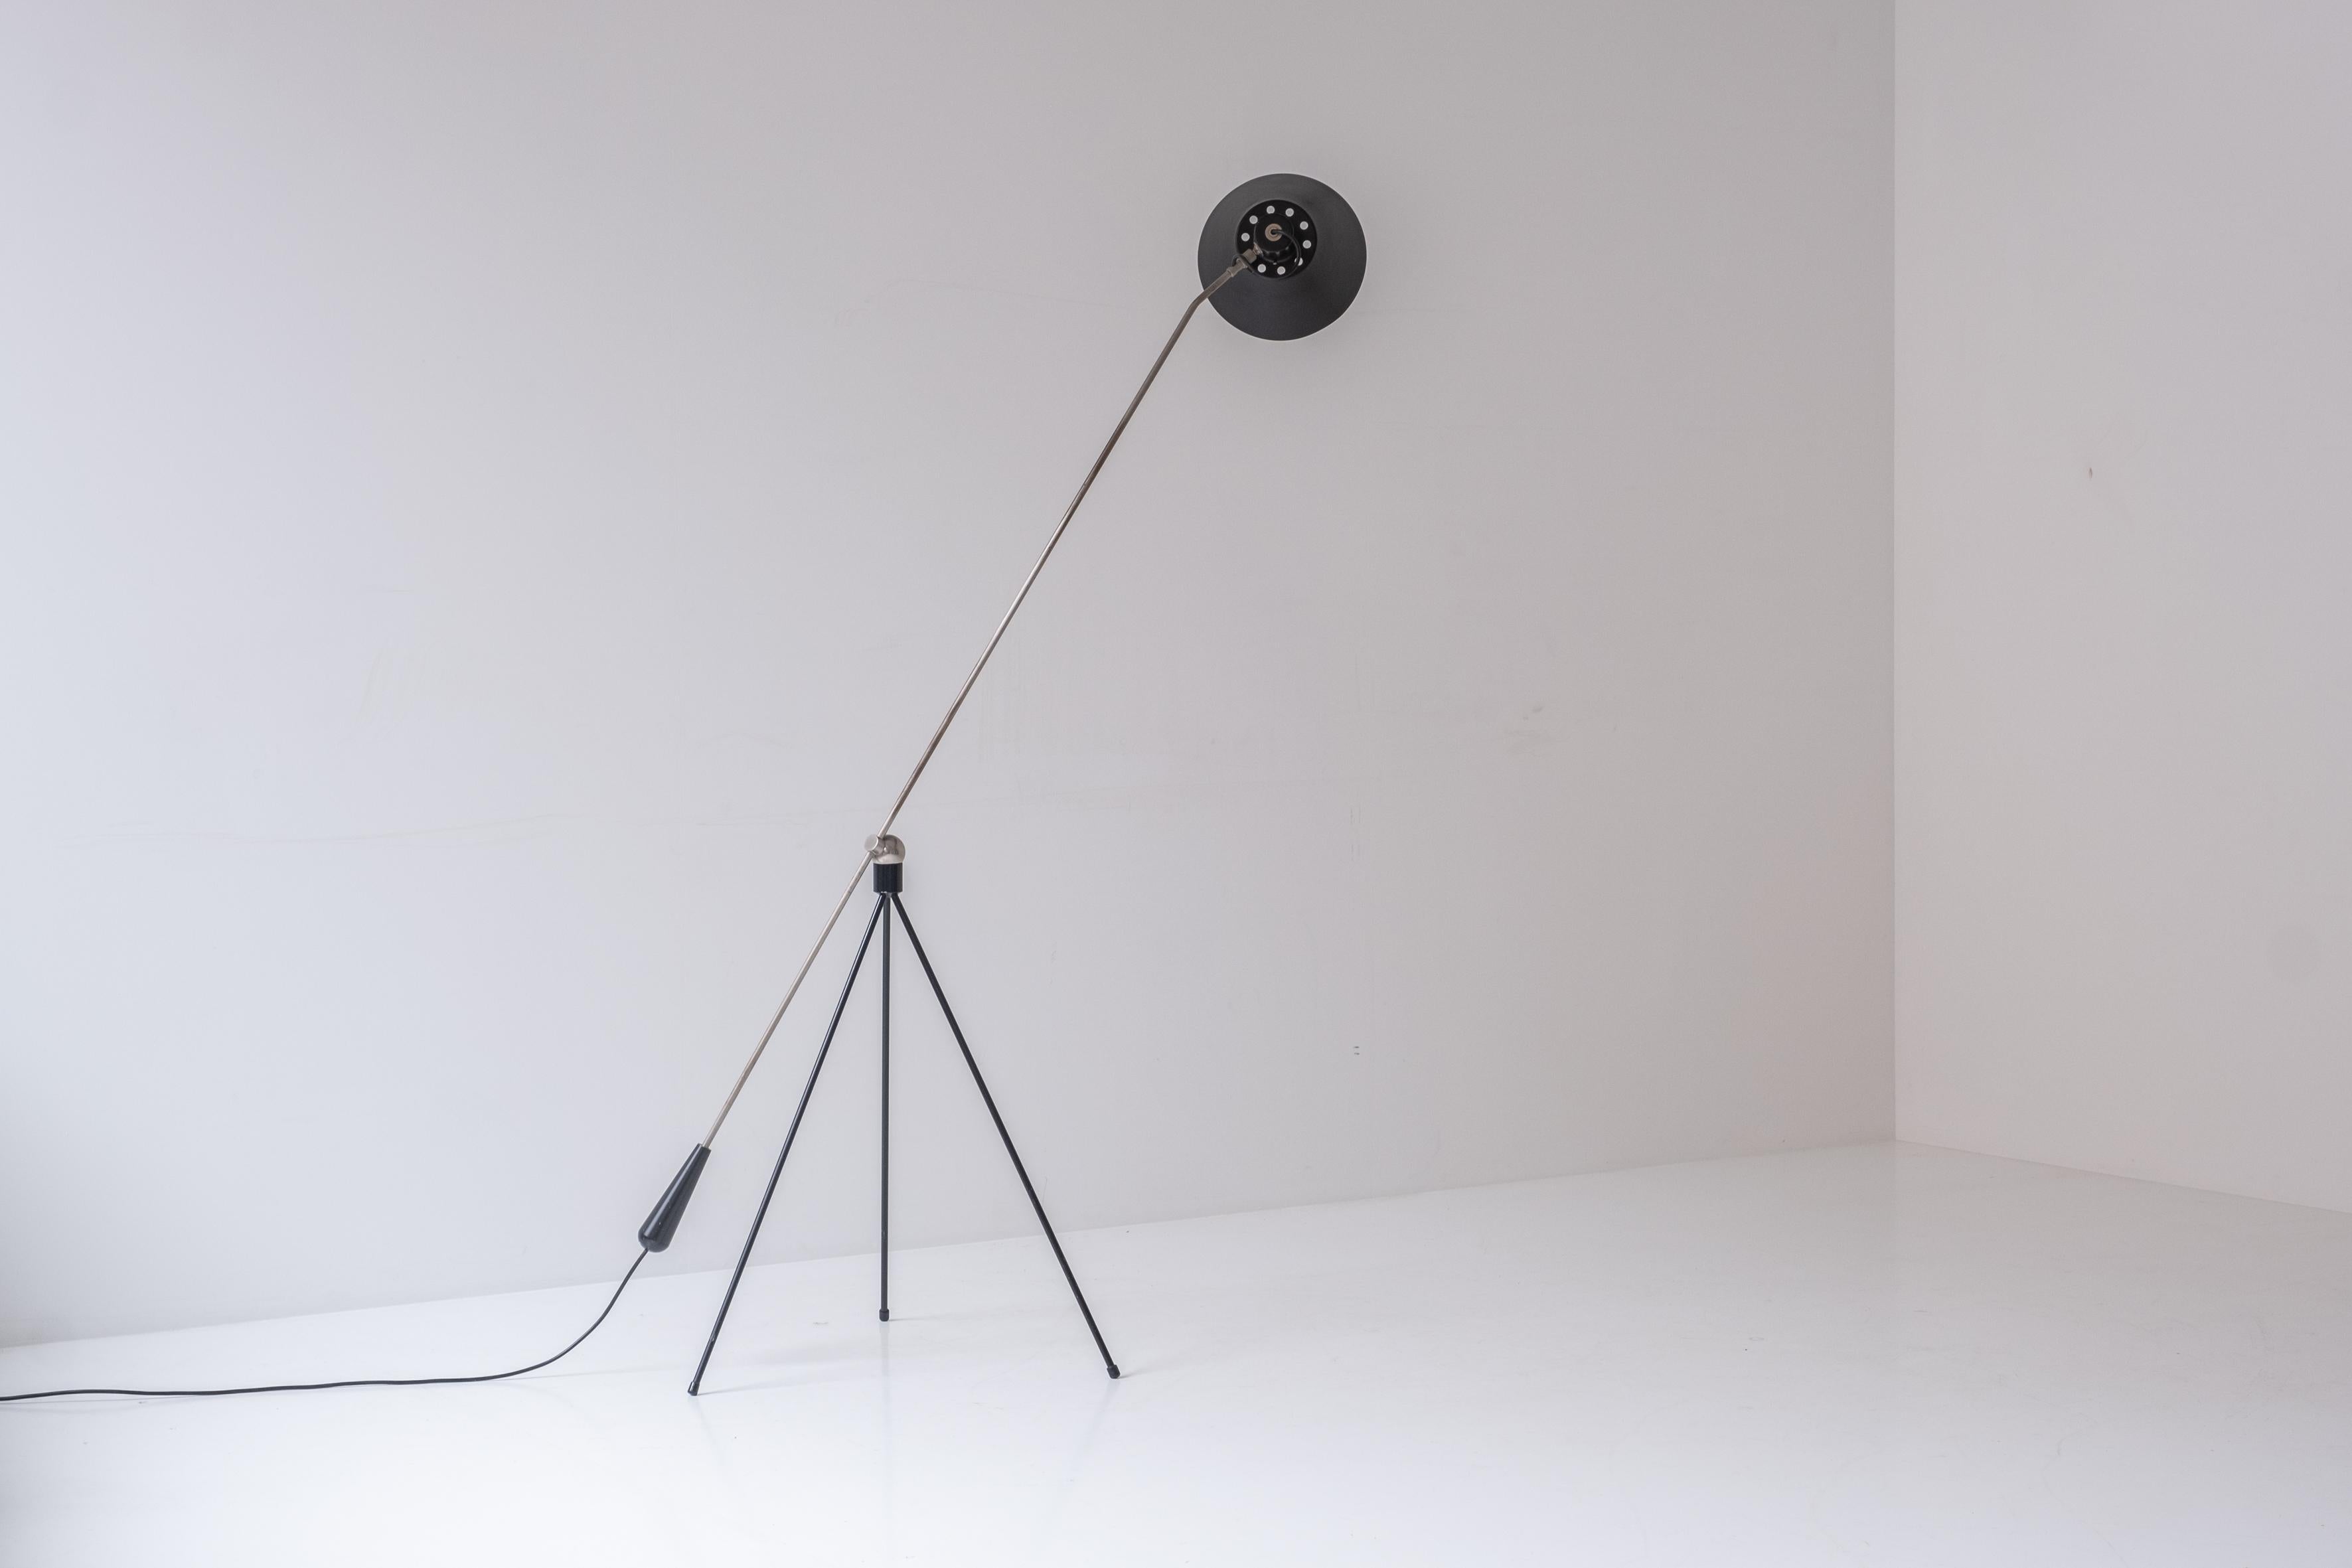 Early ‘Magneto’ floor lamp by H. Fillekes for Artiforte, The Netherlands 1954. This minimalistic floor lamp features a lacquered metal tripod foot which is connected to a balance arm using a round shaped magnet. Therefore allowing to place the lamp